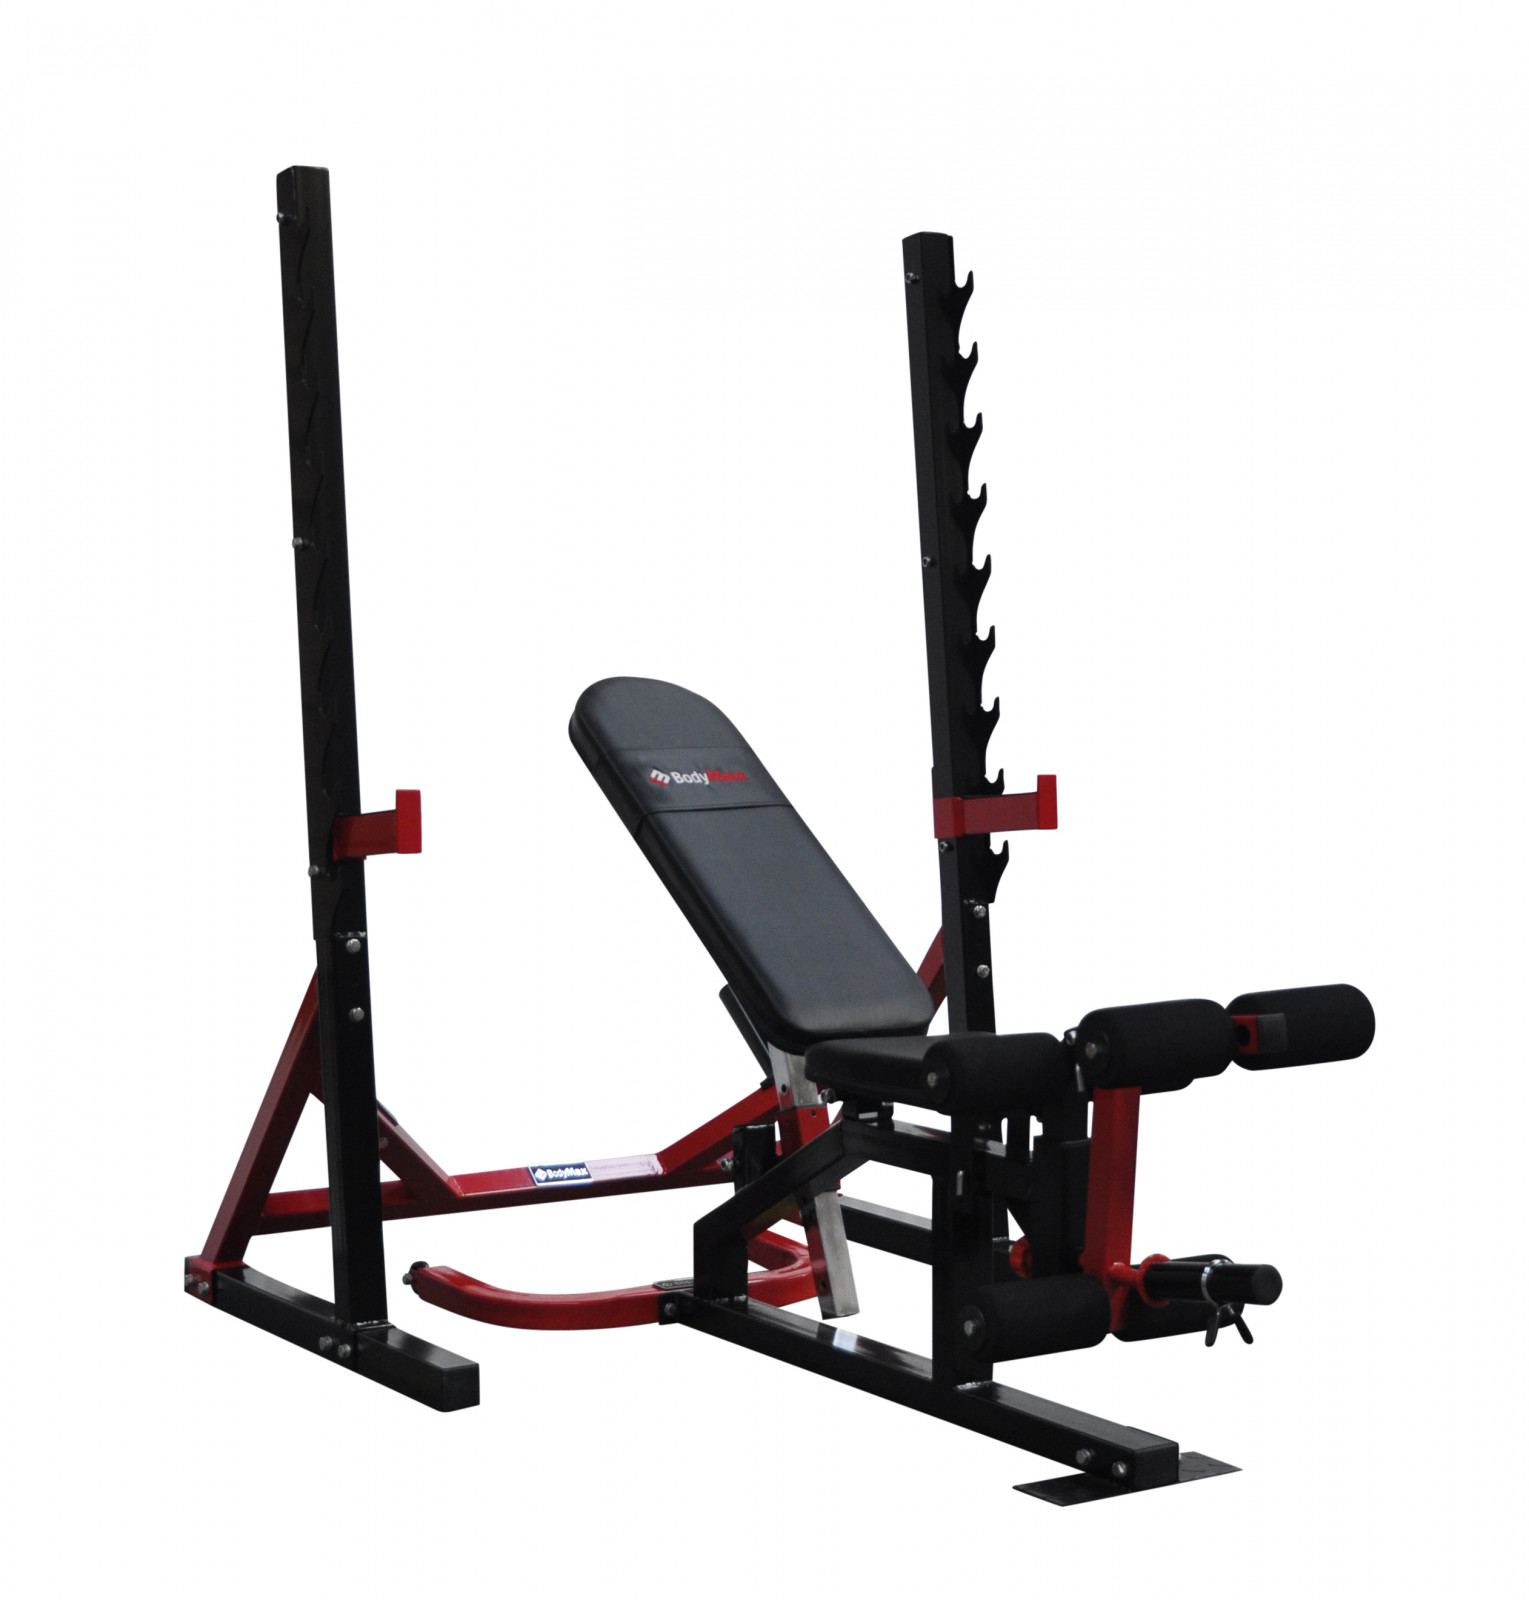 Bodymax Cf516 3 In 1 Bench Leg Curl And Preacher Shop Online Powerhouse Fitness